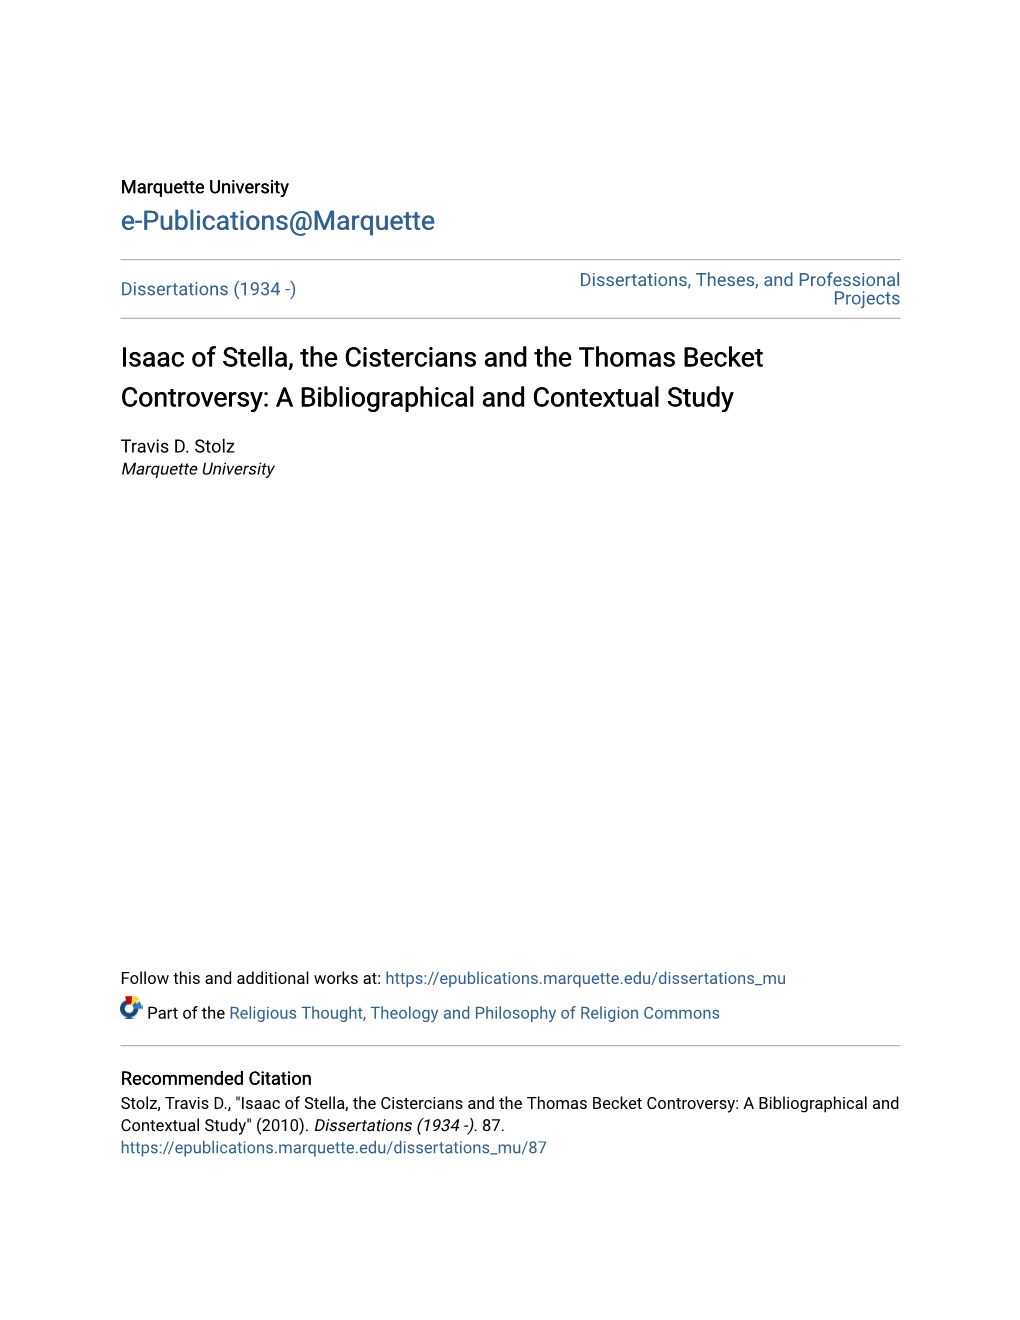 Isaac of Stella, the Cistercians and the Thomas Becket Controversy: a Bibliographical and Contextual Study